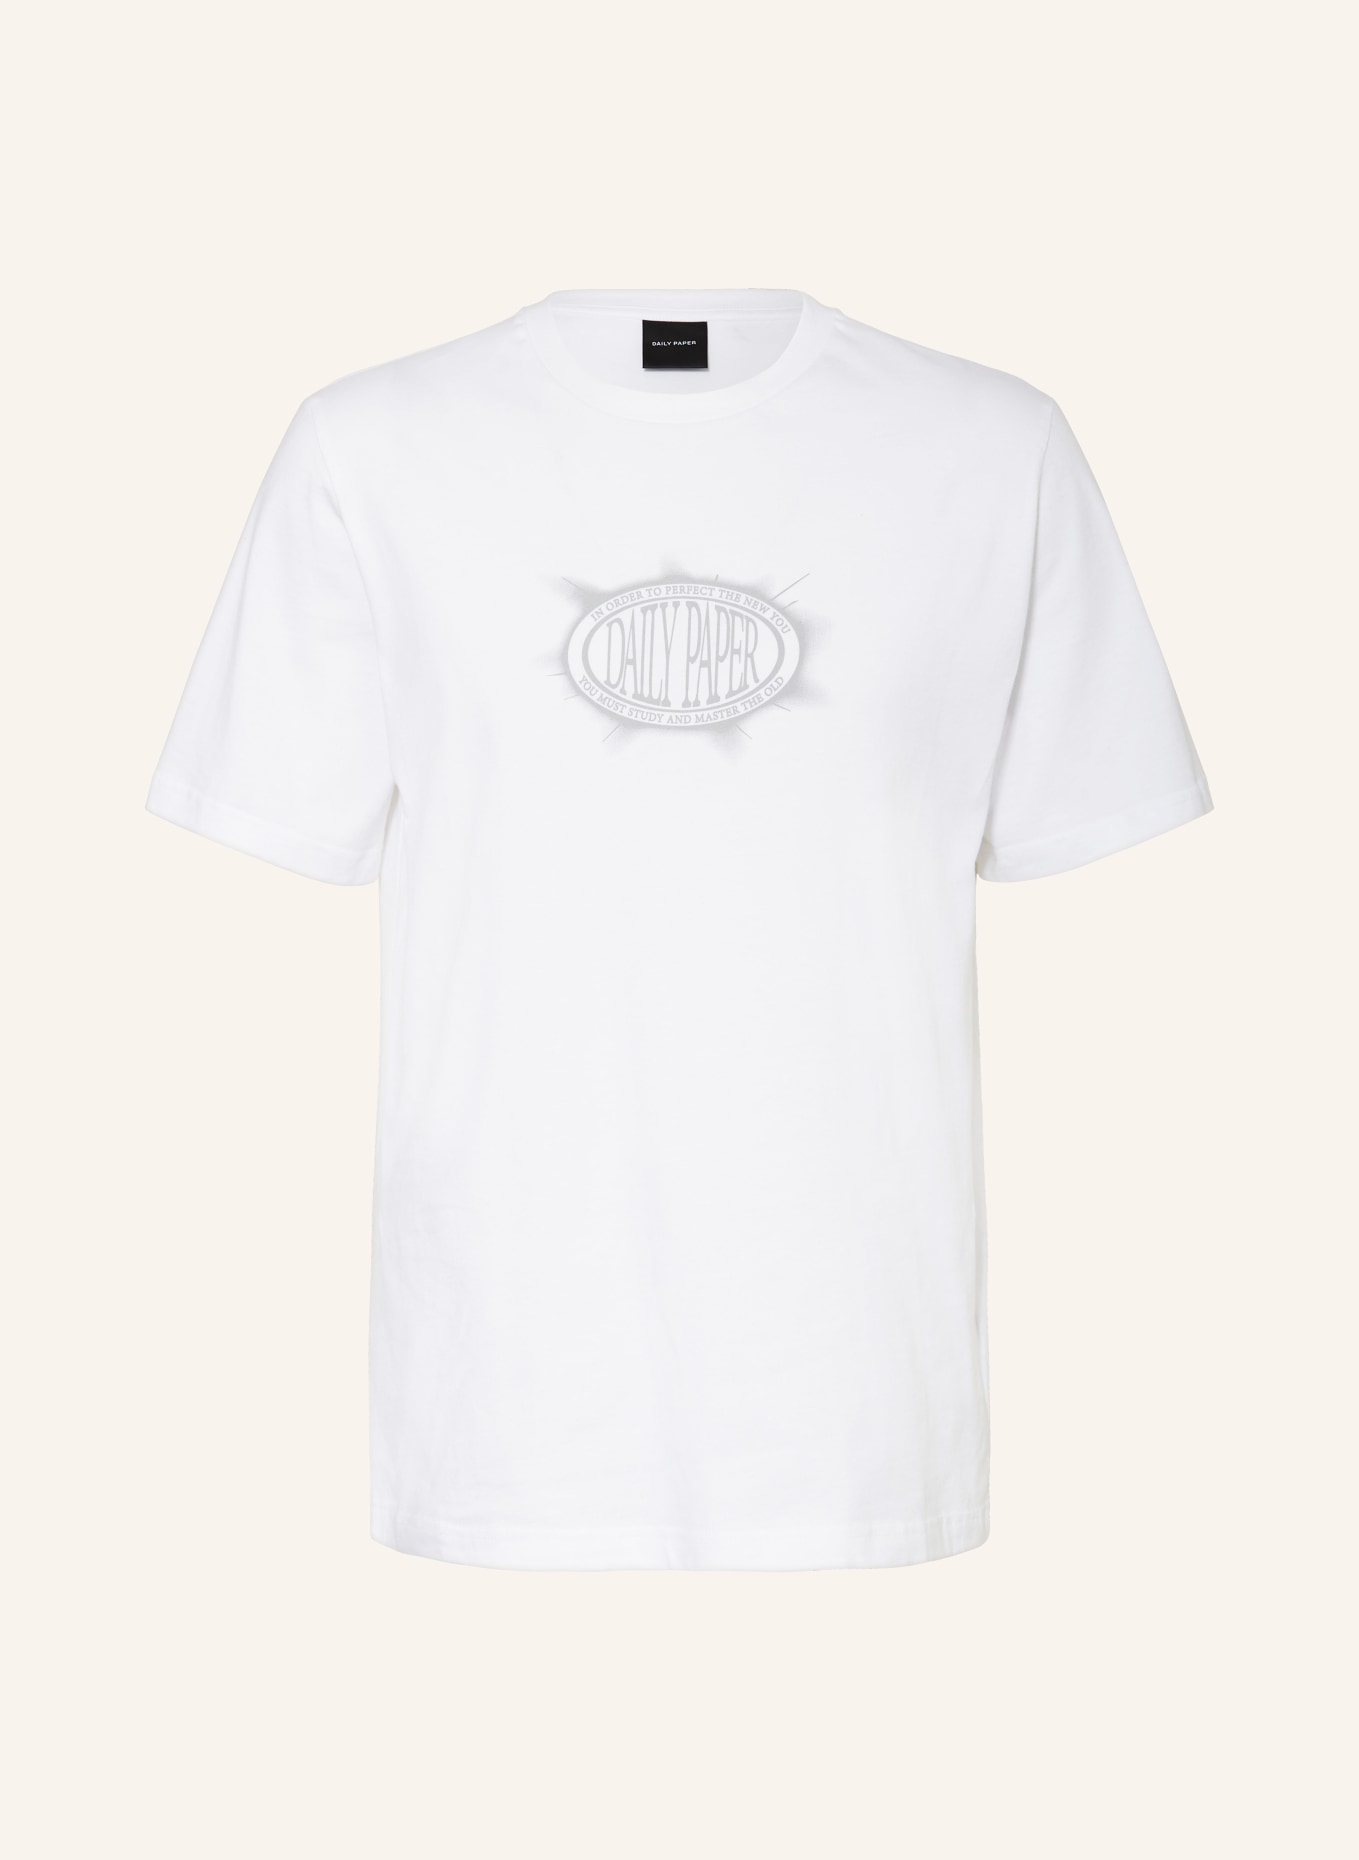 DAILY PAPER T-shirt, Color: WHITE (Image 1)